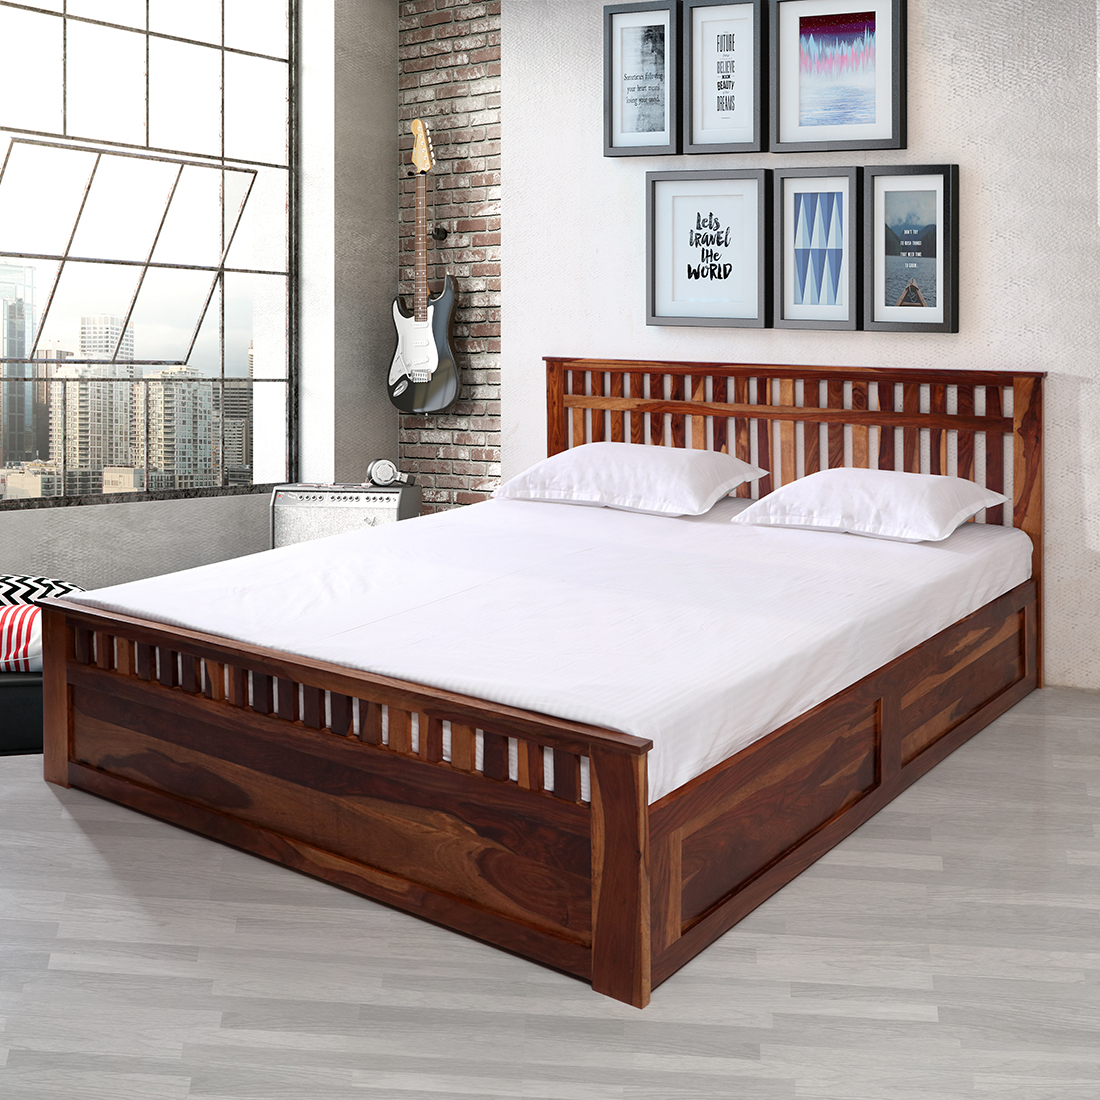 Beatrice Solidwood King Bed Box, King Bed Box